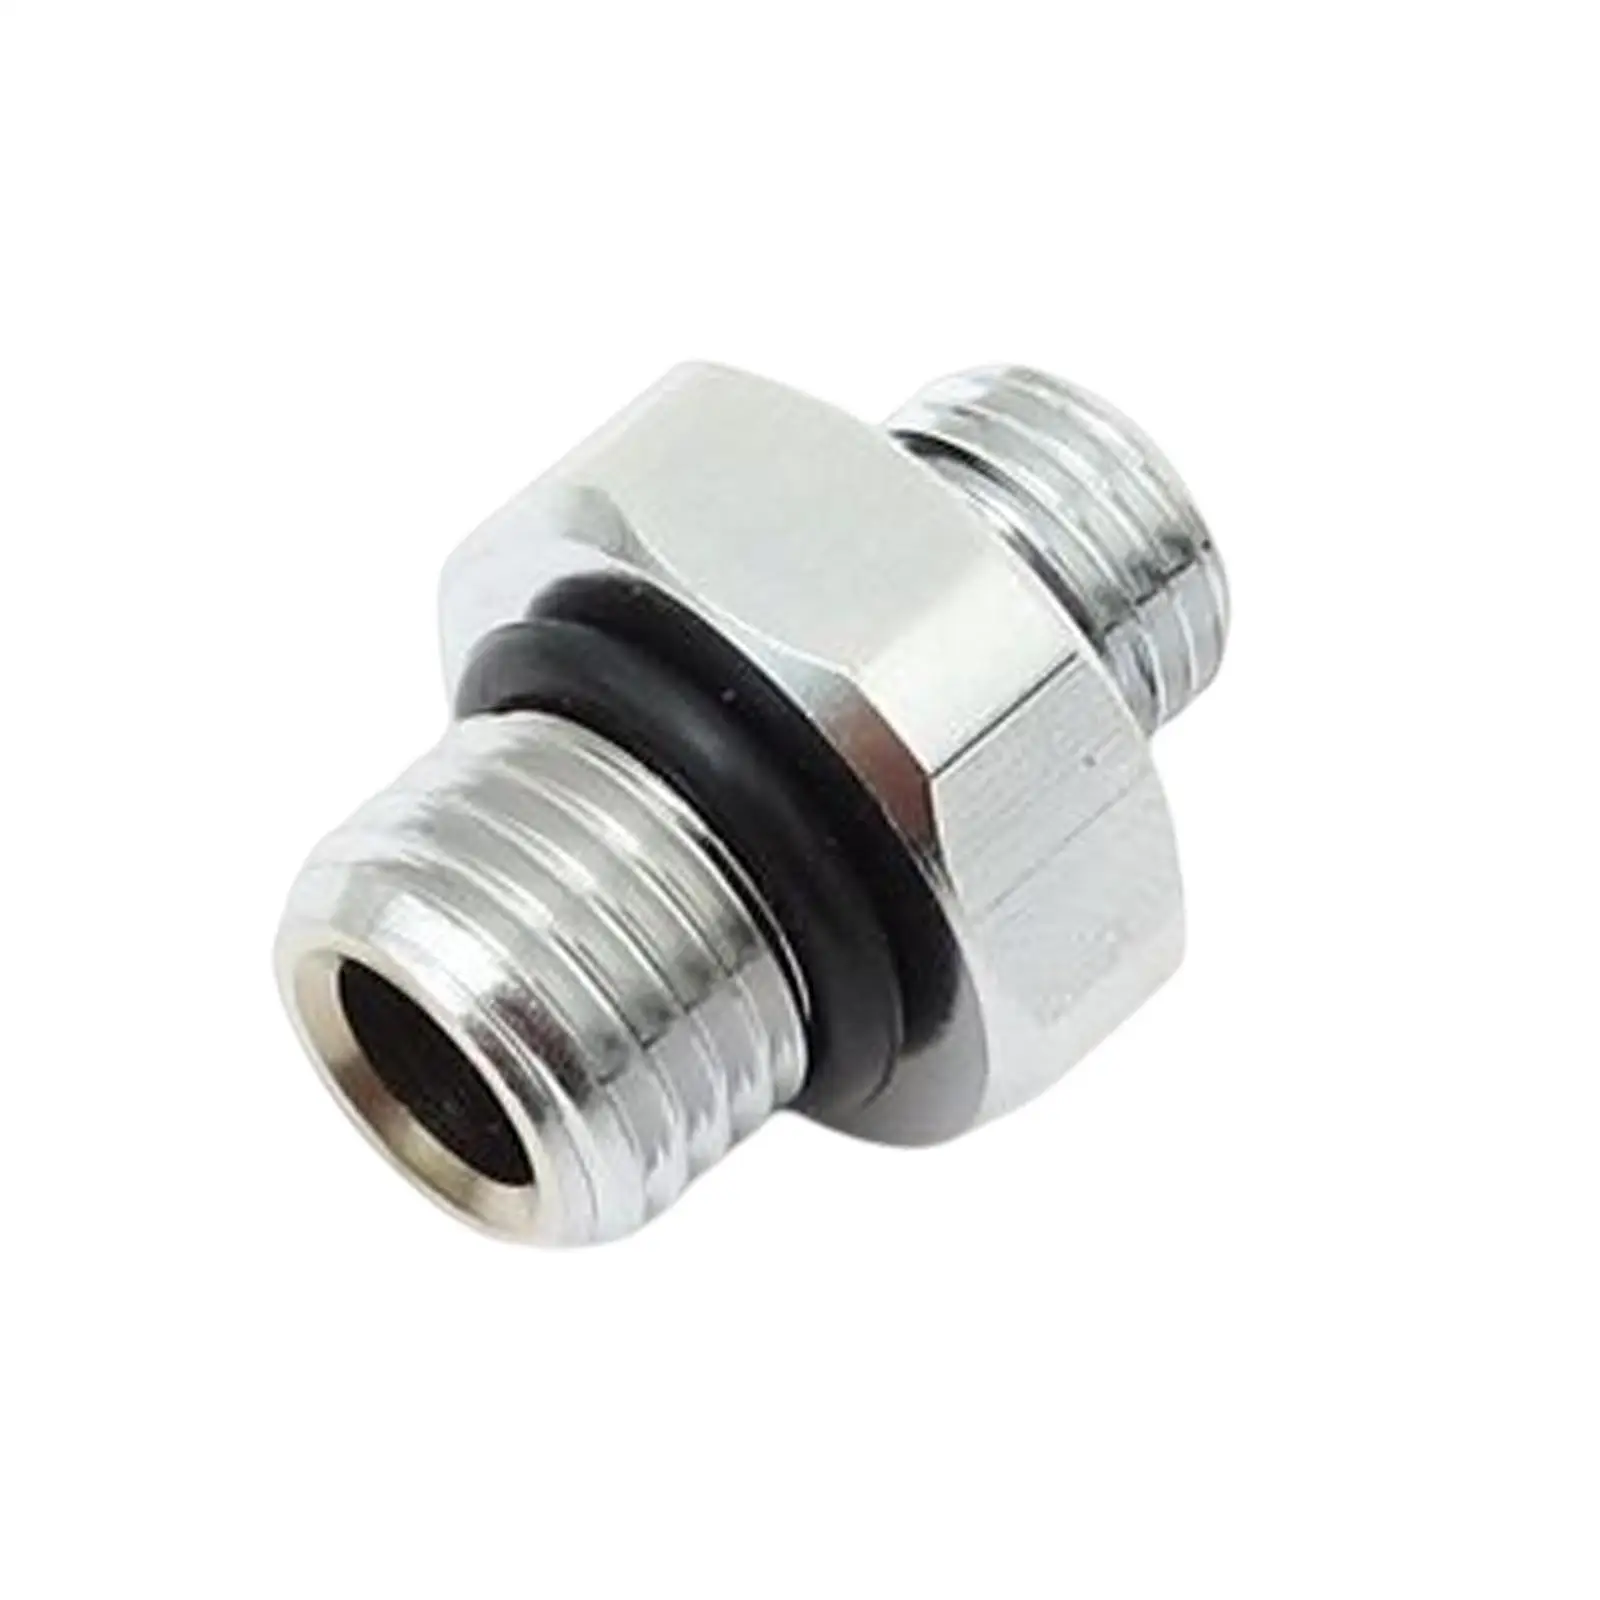 7/16-20HP and 3/8-24LP BCD Connector Brass Scuba Replacement Regulator Connector Adaptor for Diving Snorkeling Diving Equipment